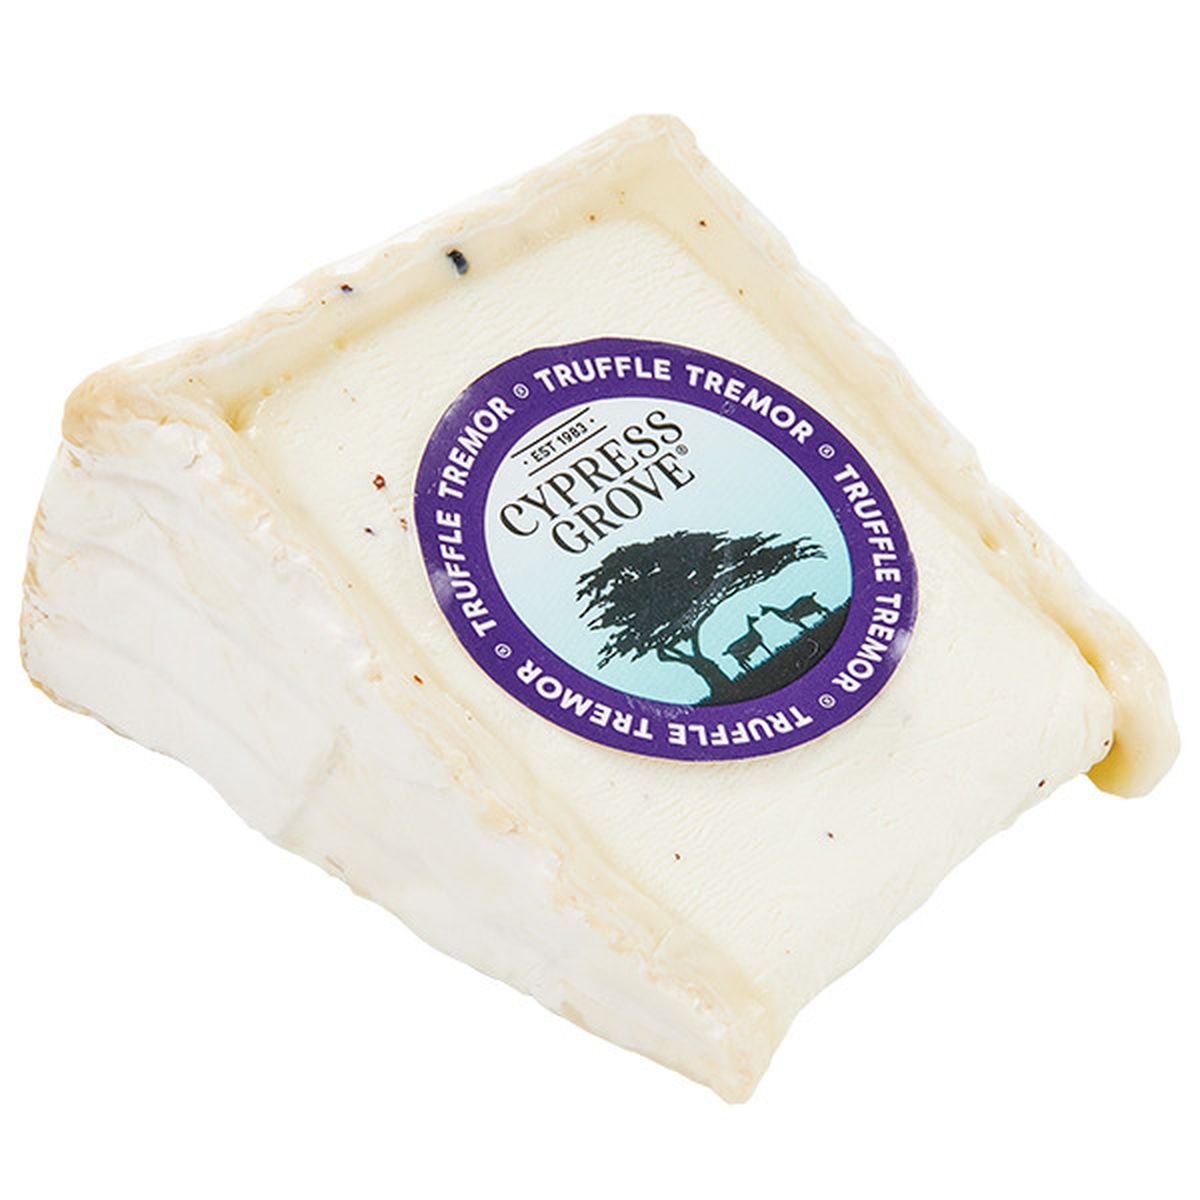 Calories in Cypress Grove Chevre Goat Cheese Truffle Tremor